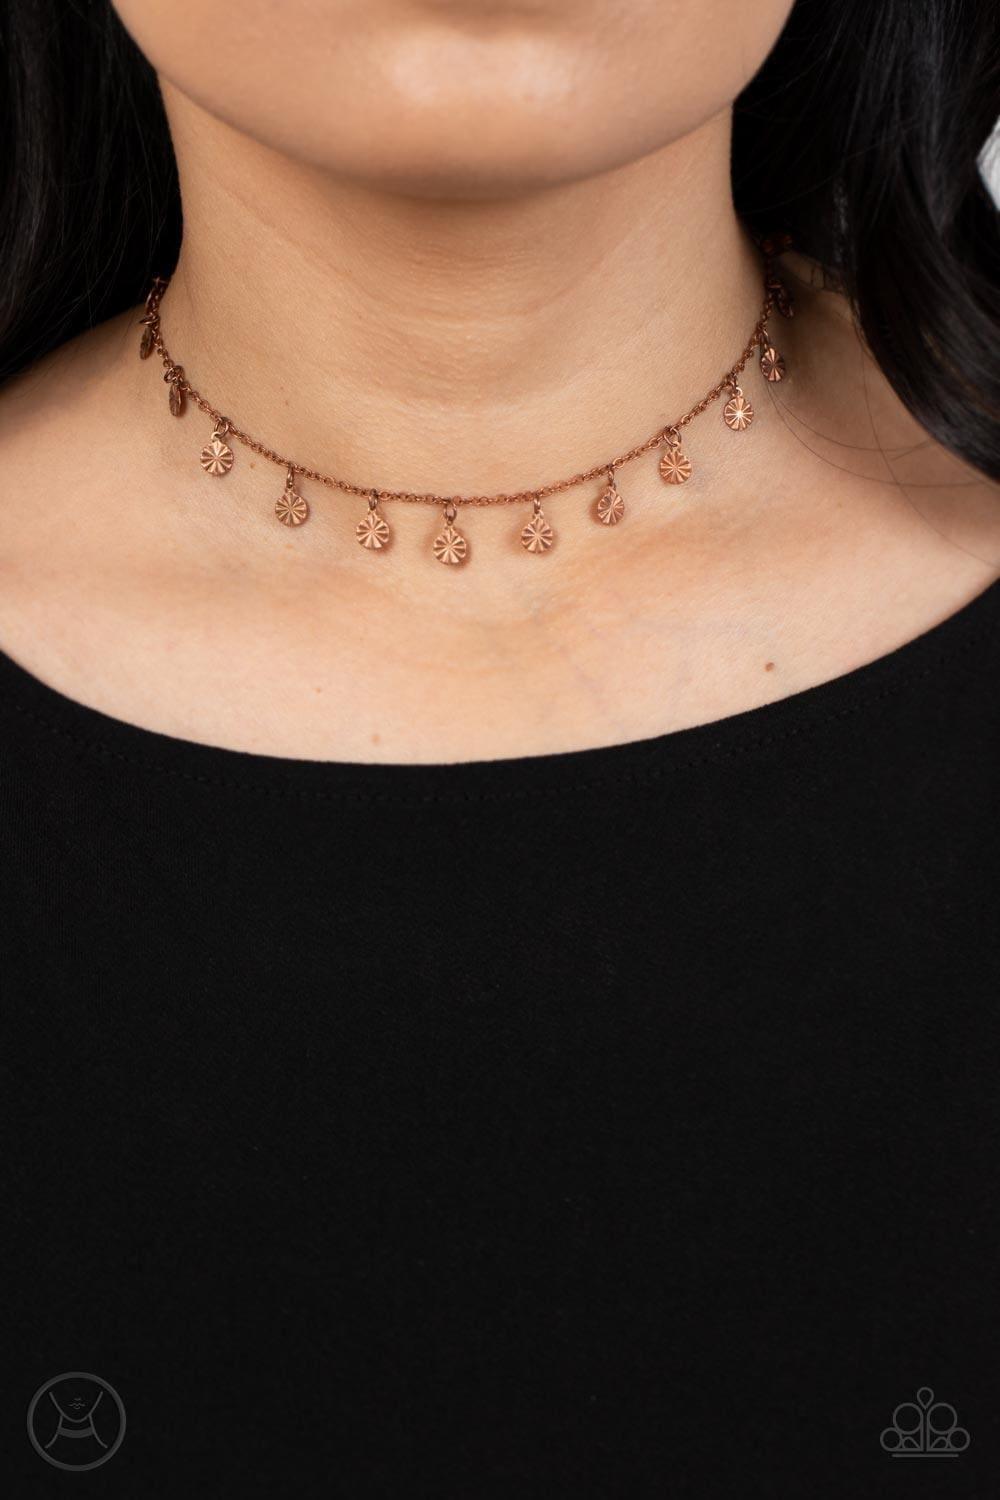 Paparazzi Accessories - Chiming Charmer - Copper Choker Necklace - Bling by JessieK